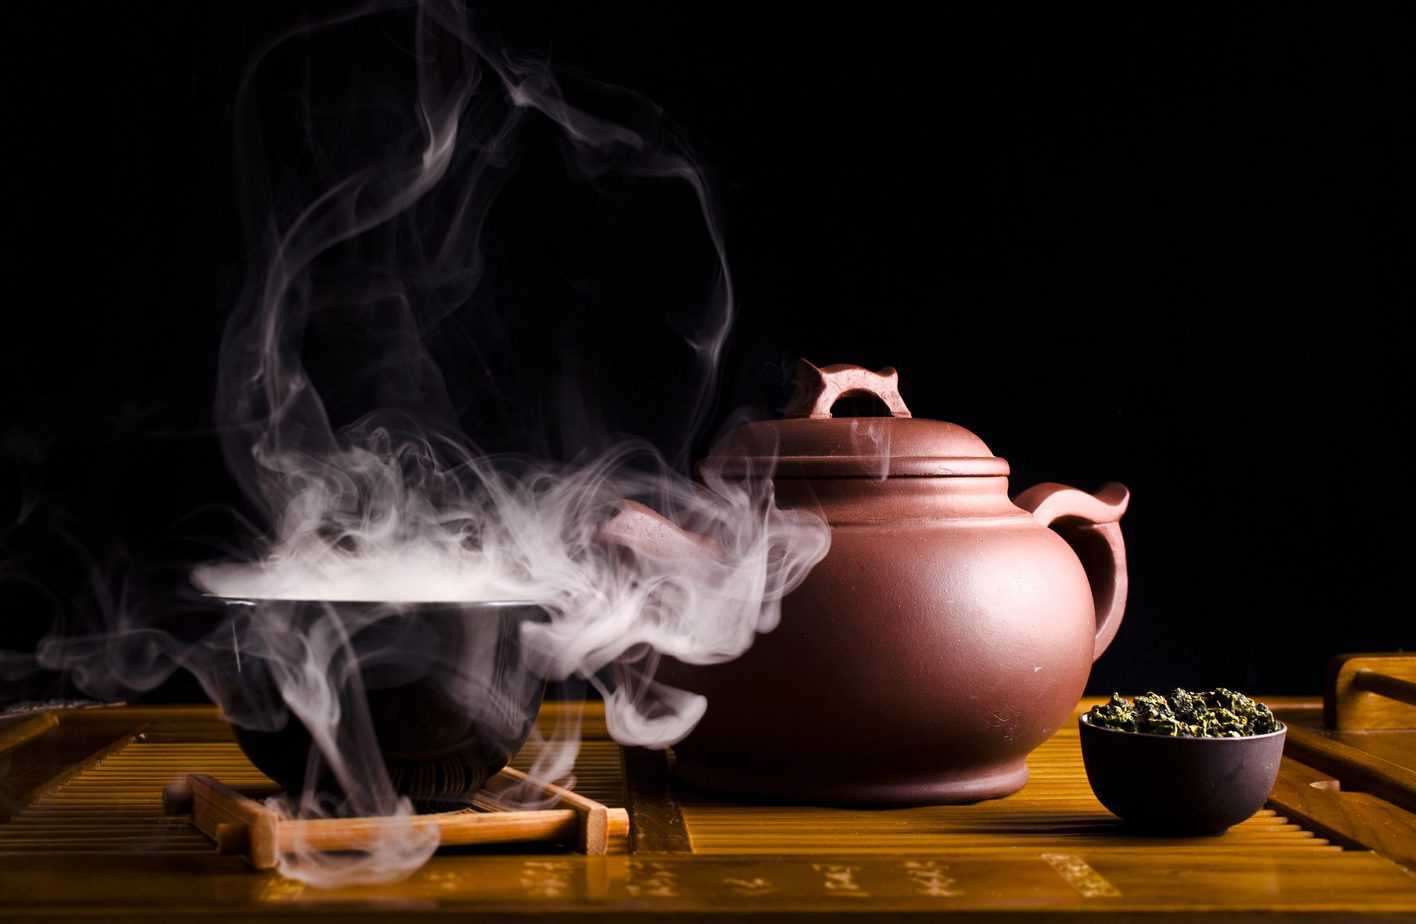 chinese-tea-ceremony-ceramic-tea-pot-and-cups-with-the-famous-chinese-oolong-tea-tieguanyin-with-vapour-on-a-black-background